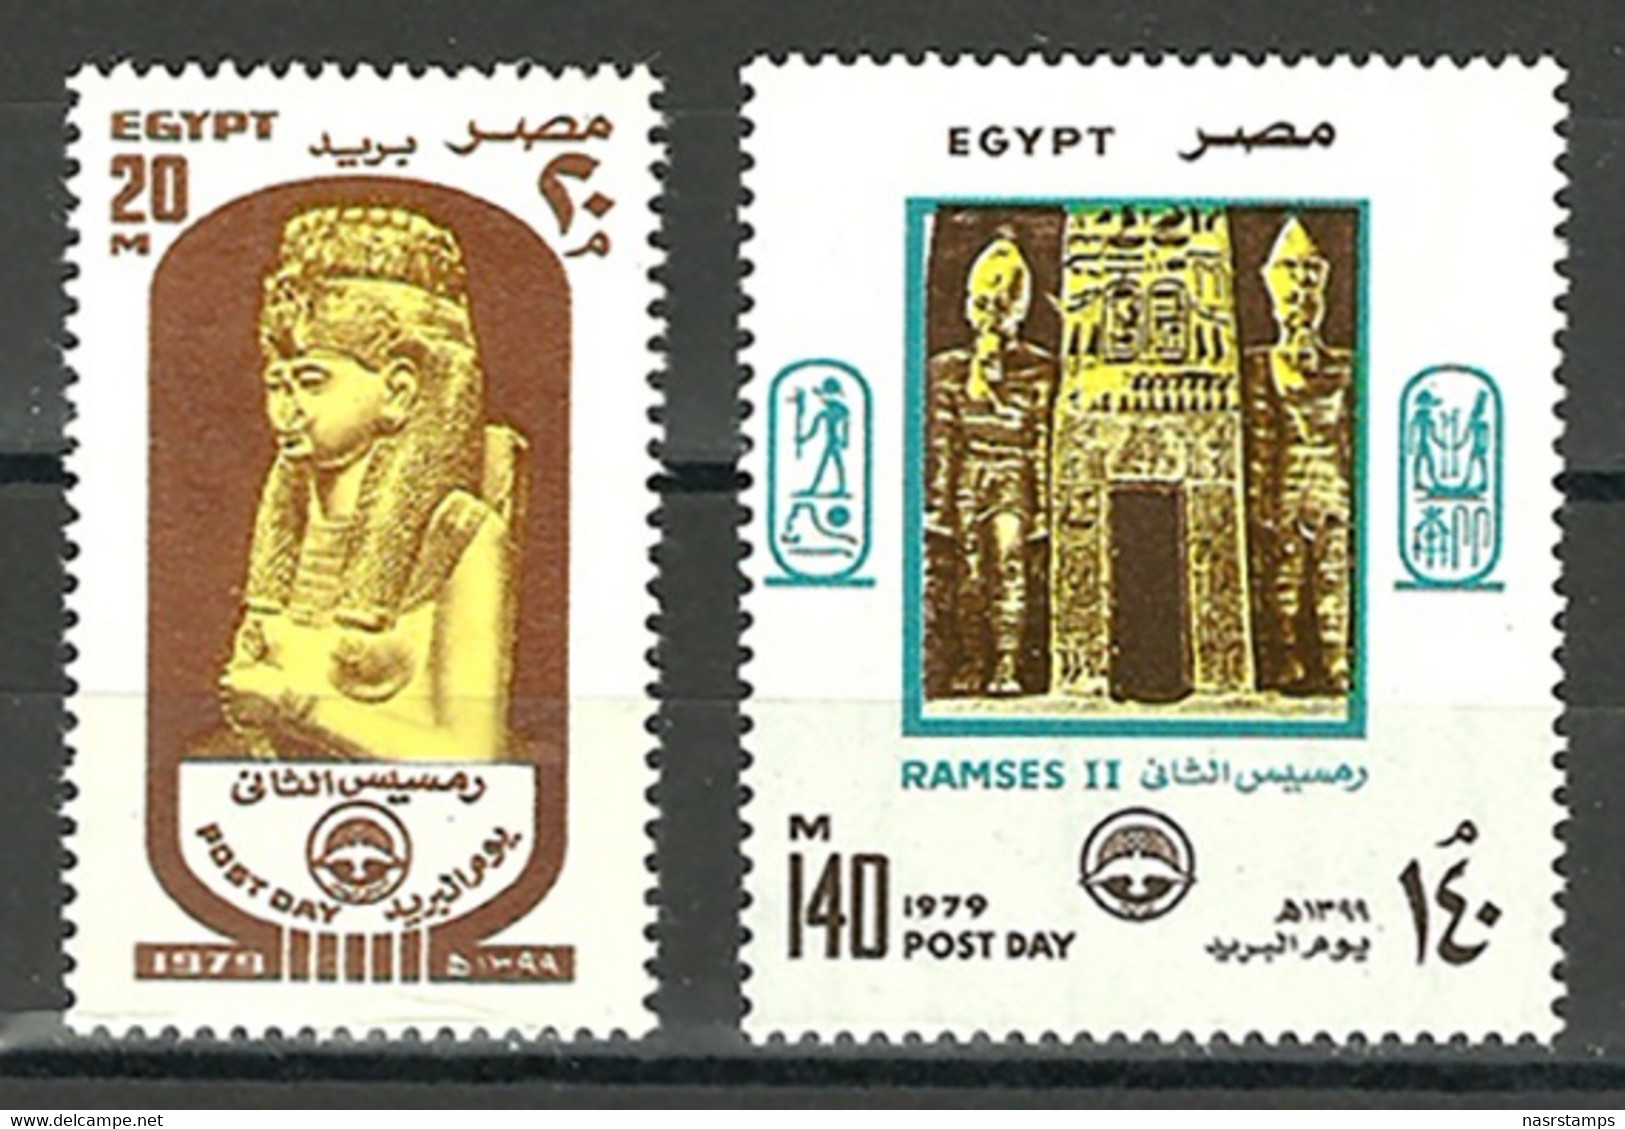 Egypt - 1979 - ( Post Day - Second Daughter Of Ramses II - Ramses Statues, Abu Simbel, And Cartouches ) - MNH (**) - Egittologia